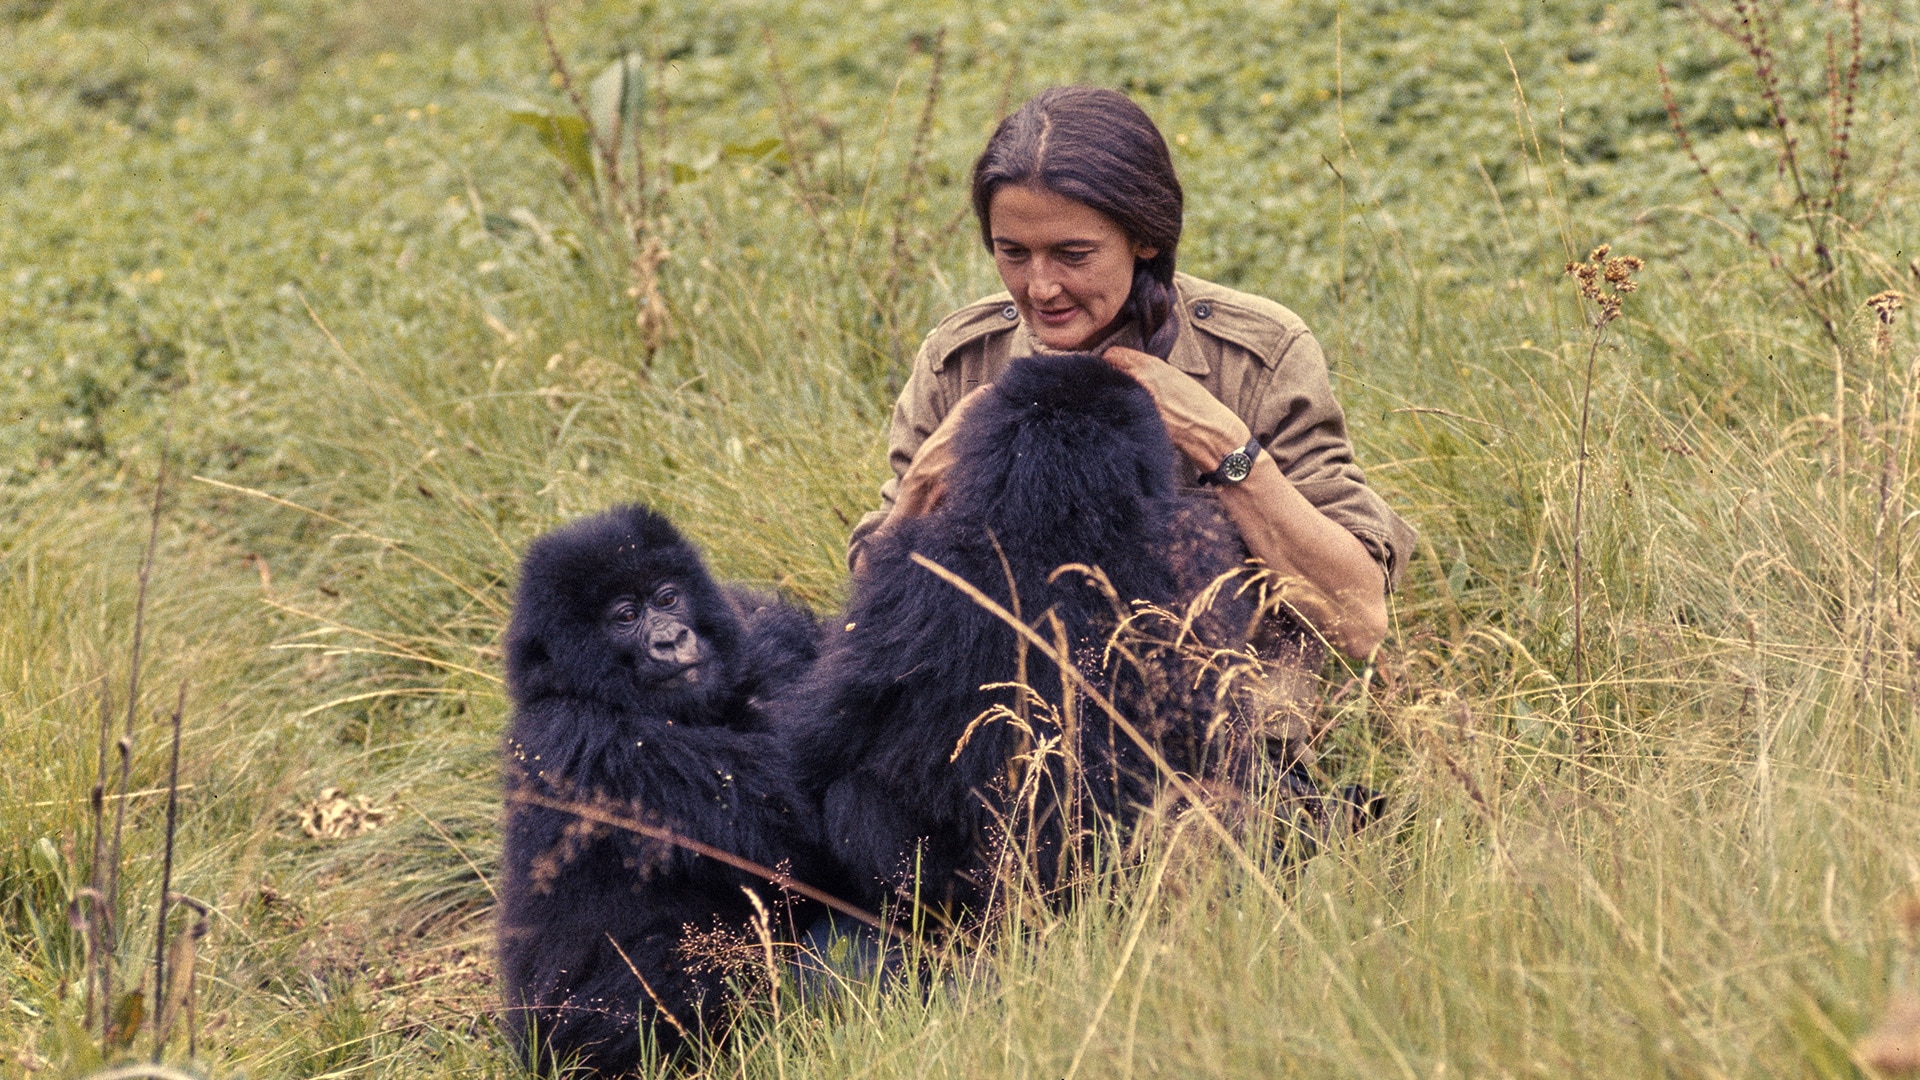 Louis Leakey selected three women to study the great apes, they inspire others today